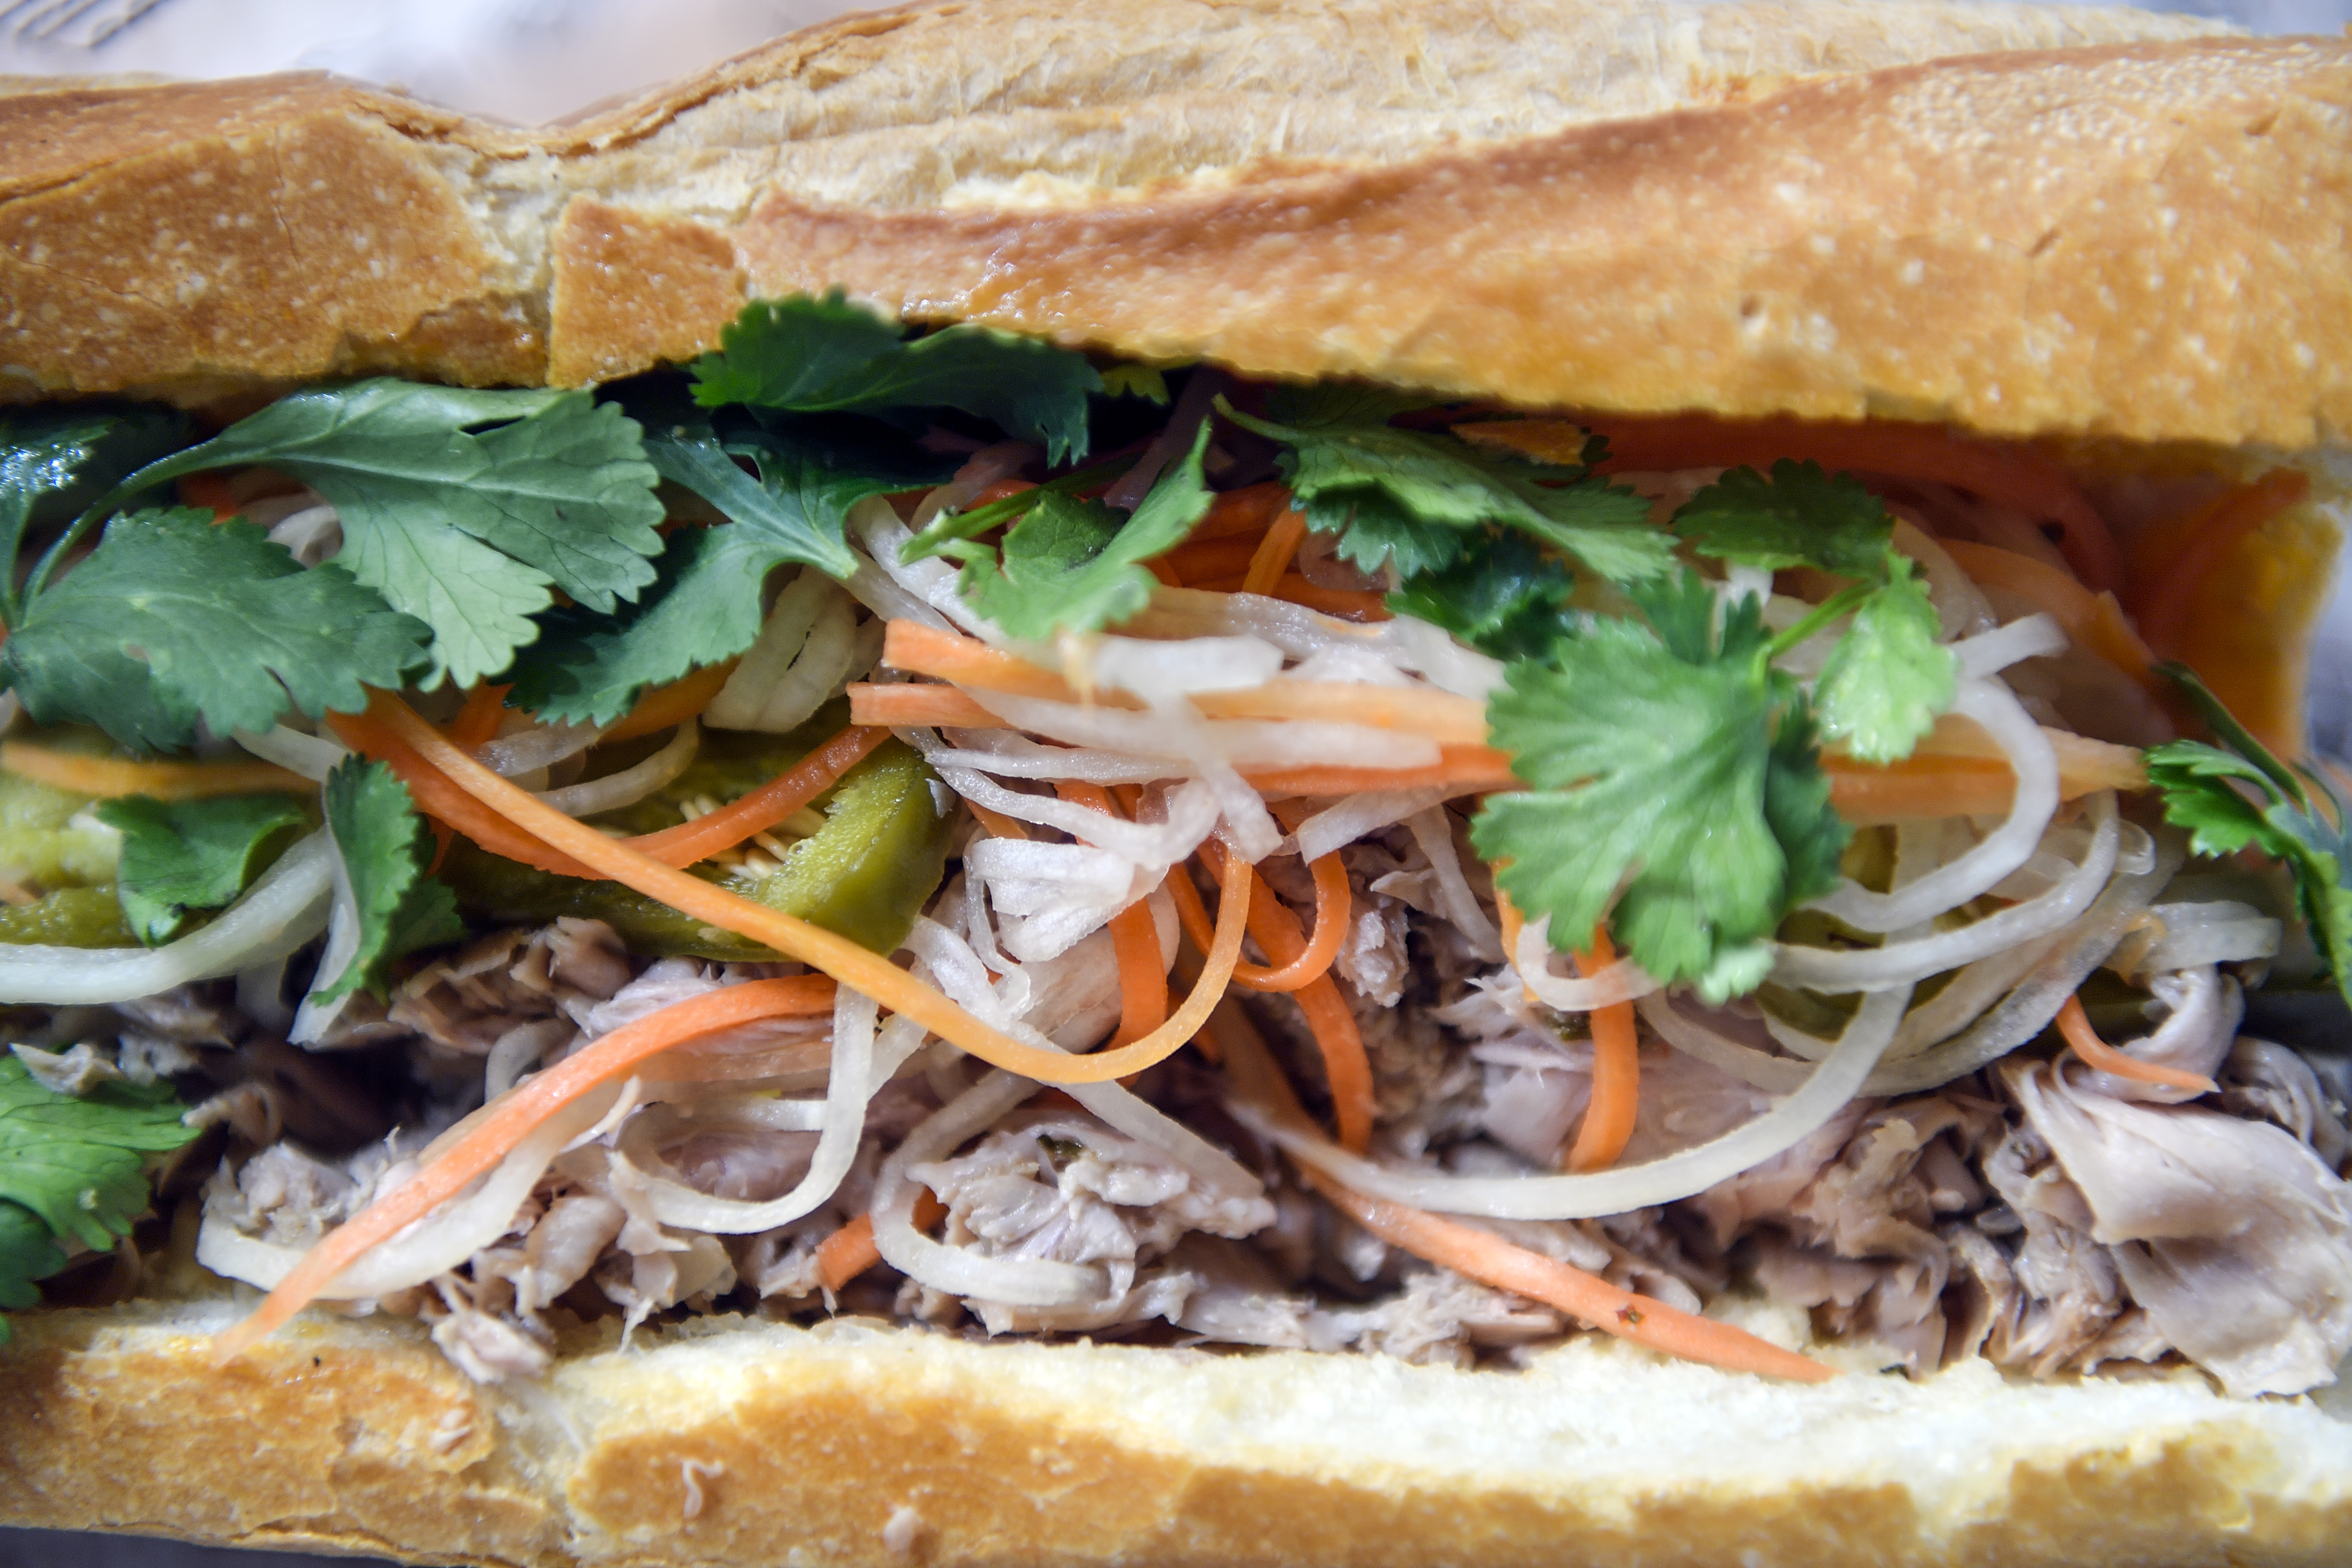 A student criticized the dining hall's rendition of bánh mì sandwiches at Oberlin. Then the New York Post got involved.